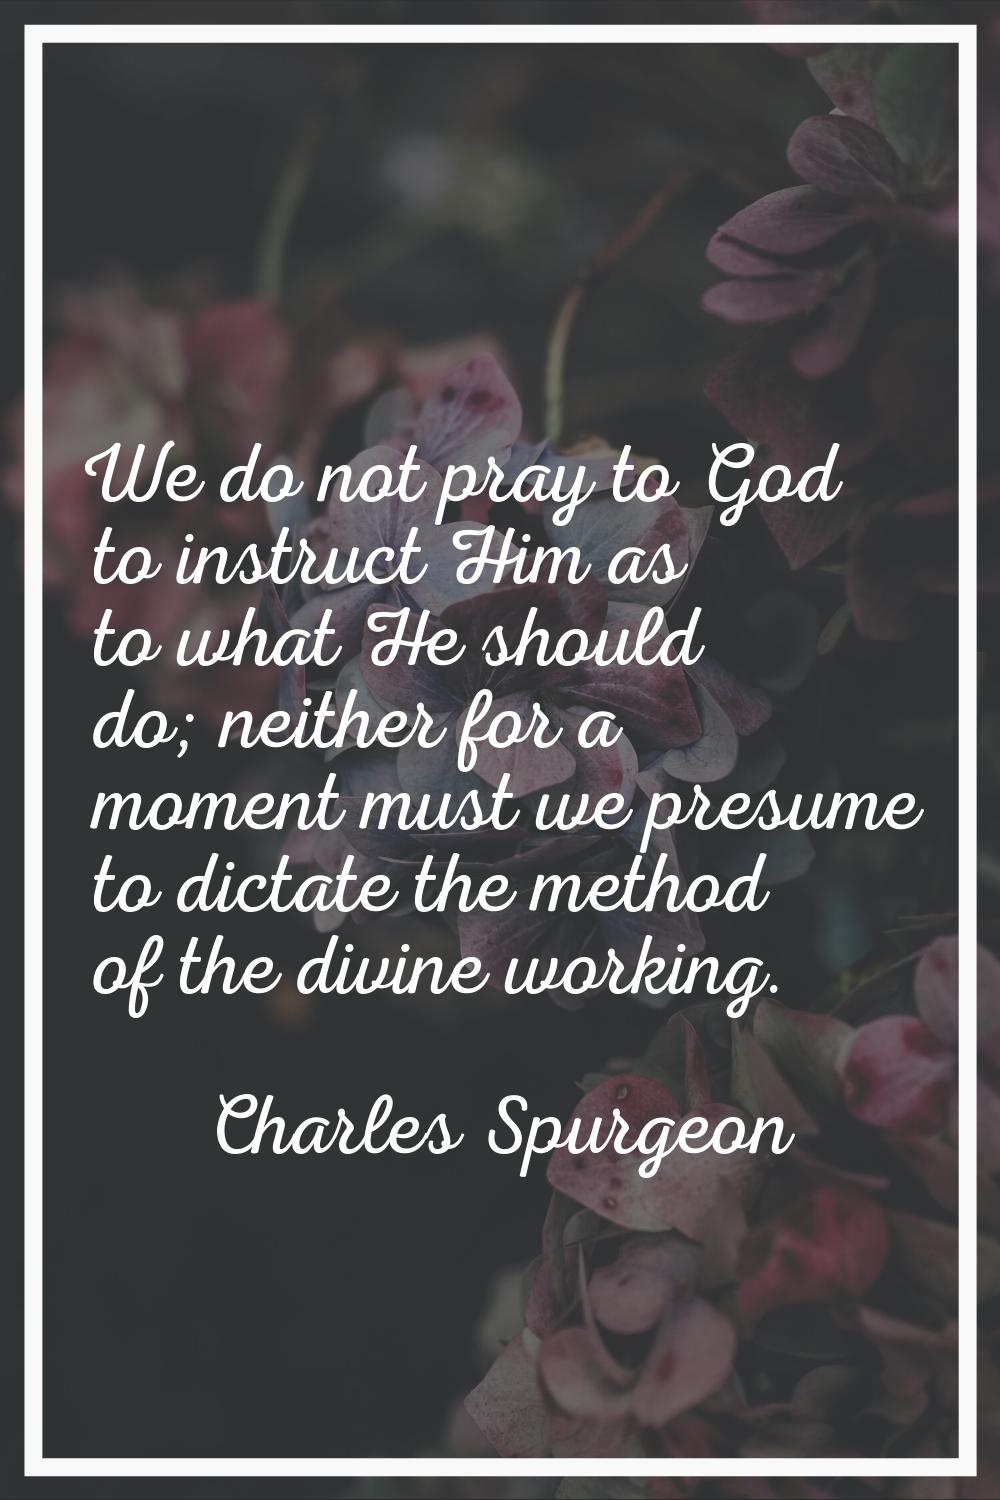 We do not pray to God to instruct Him as to what He should do; neither for a moment must we presume